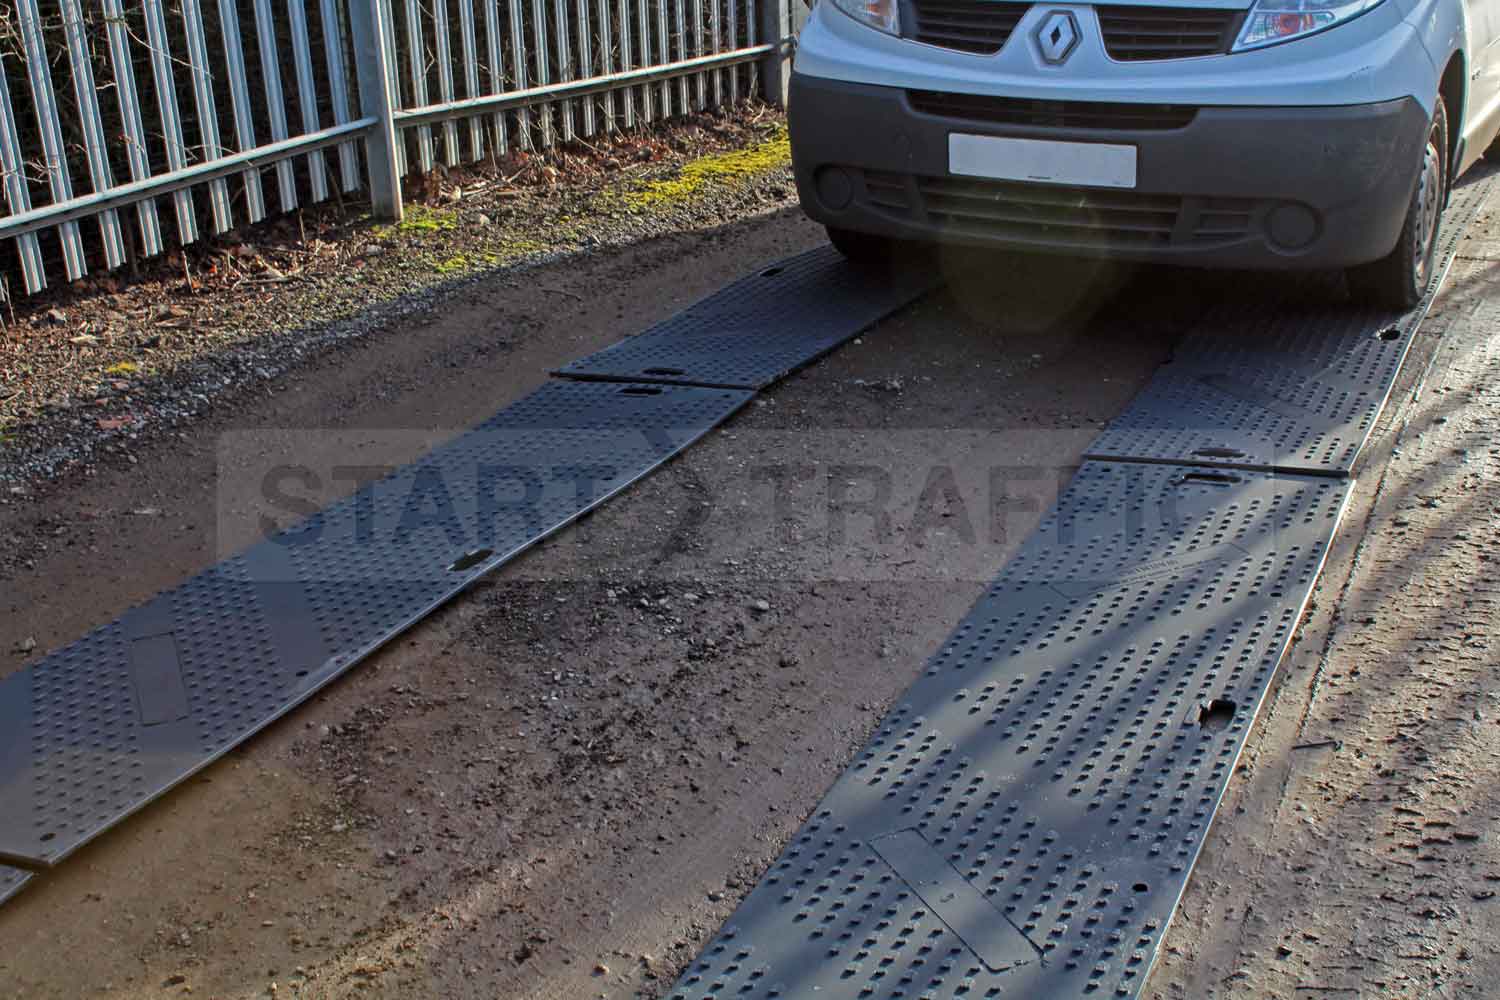 HalfTrak Euromat Ground Protection being driven on by Van